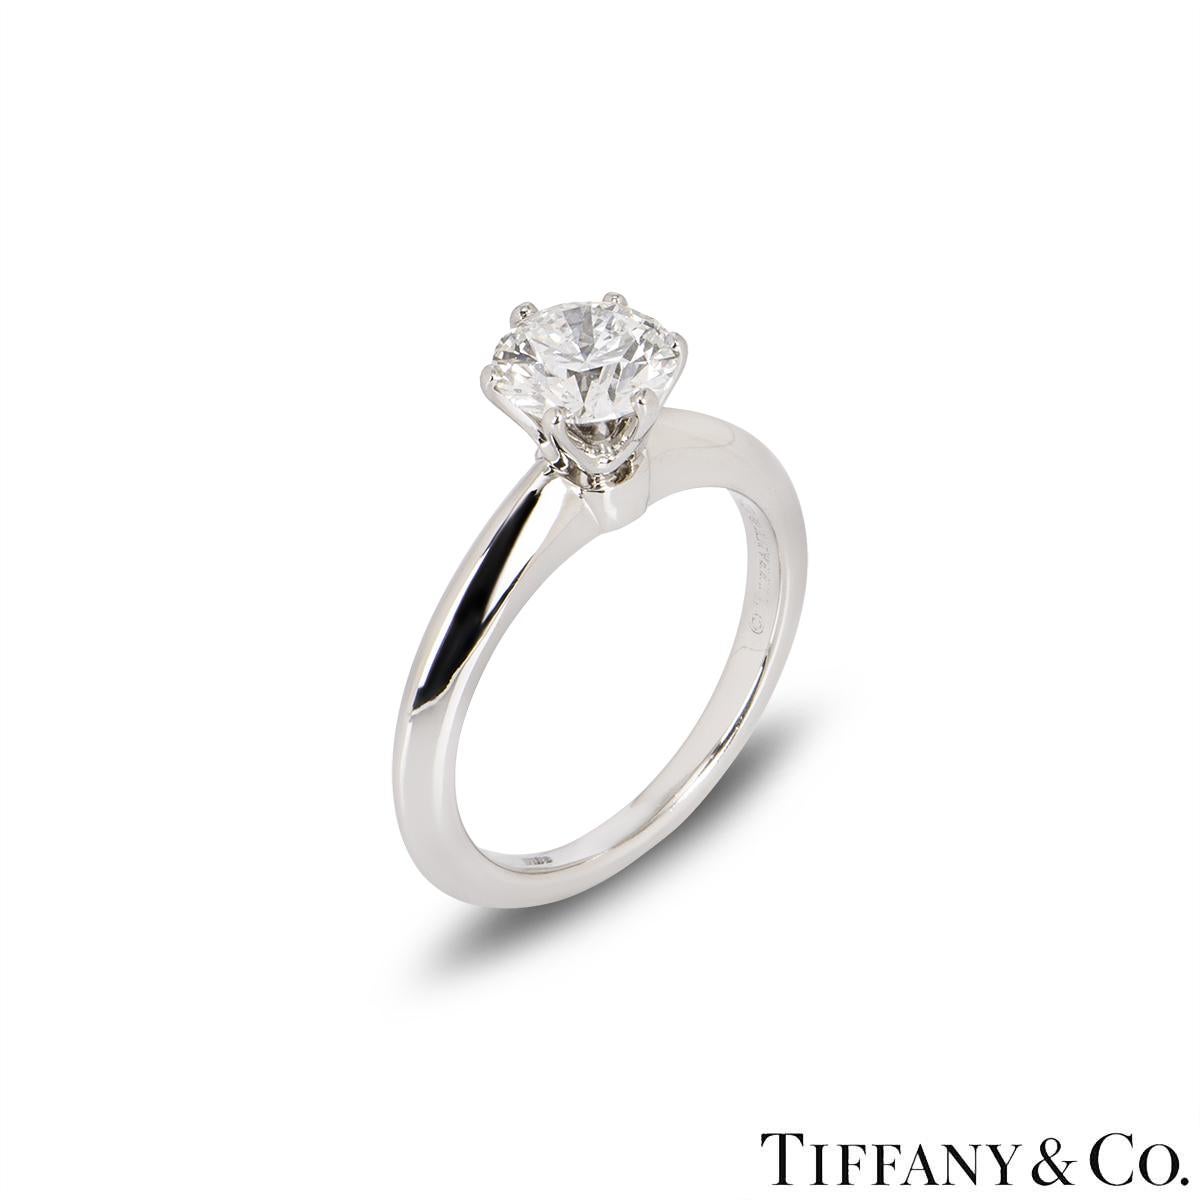 A classic platinum diamond ring by Tiffany & Co. from the Setting collection. The ring comprises of a round brilliant cut diamond in a platinum six claw setting with a weight of 1.08ct, H colour and VS2 clarity. The diamond scores an excellent